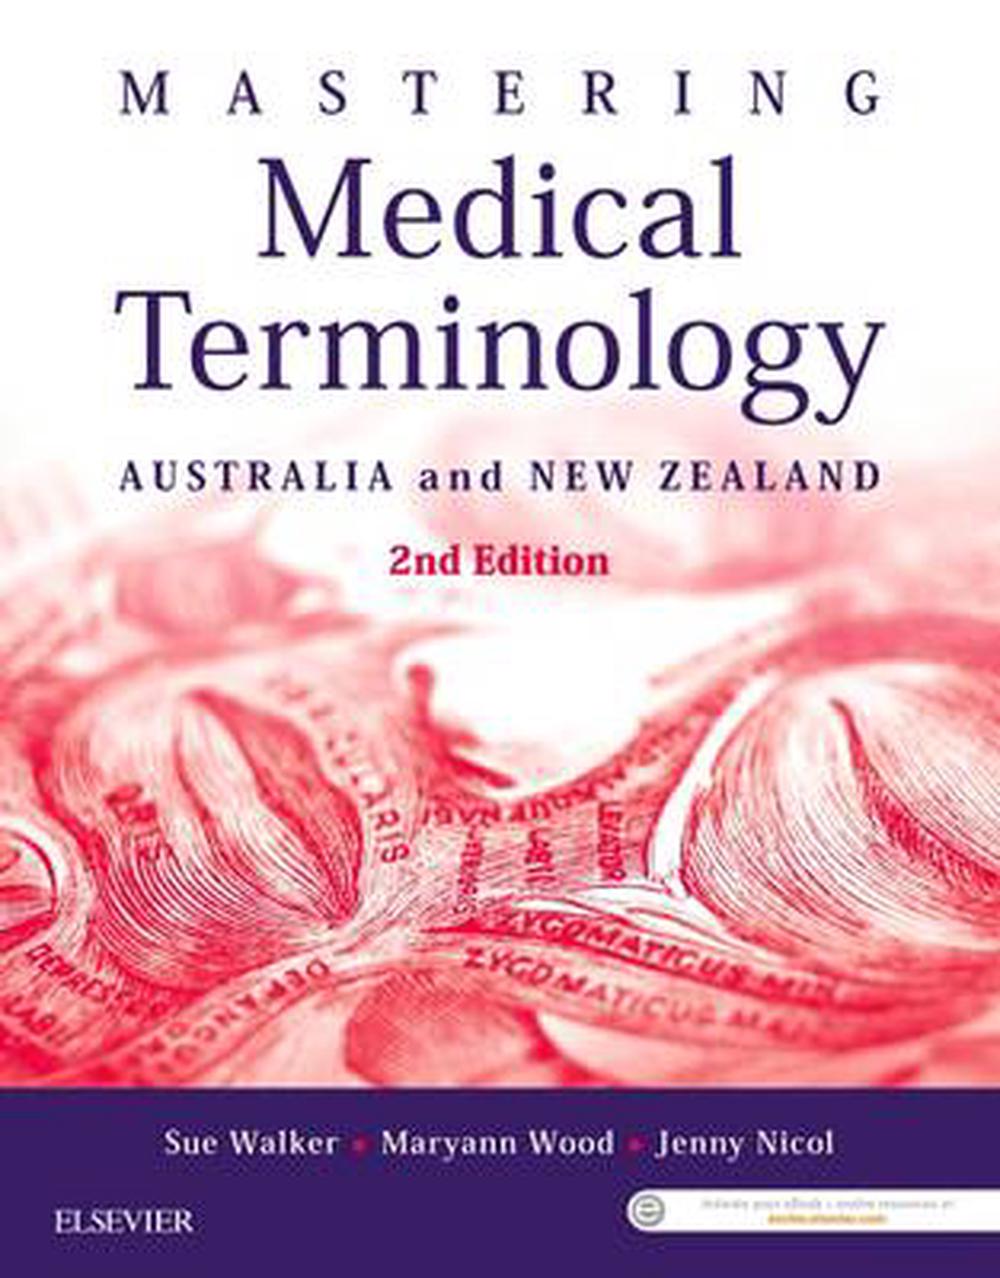 Mastering Medical Terminology Australia and New Zealand 2nd Edition by Sue Walk 9780729542401